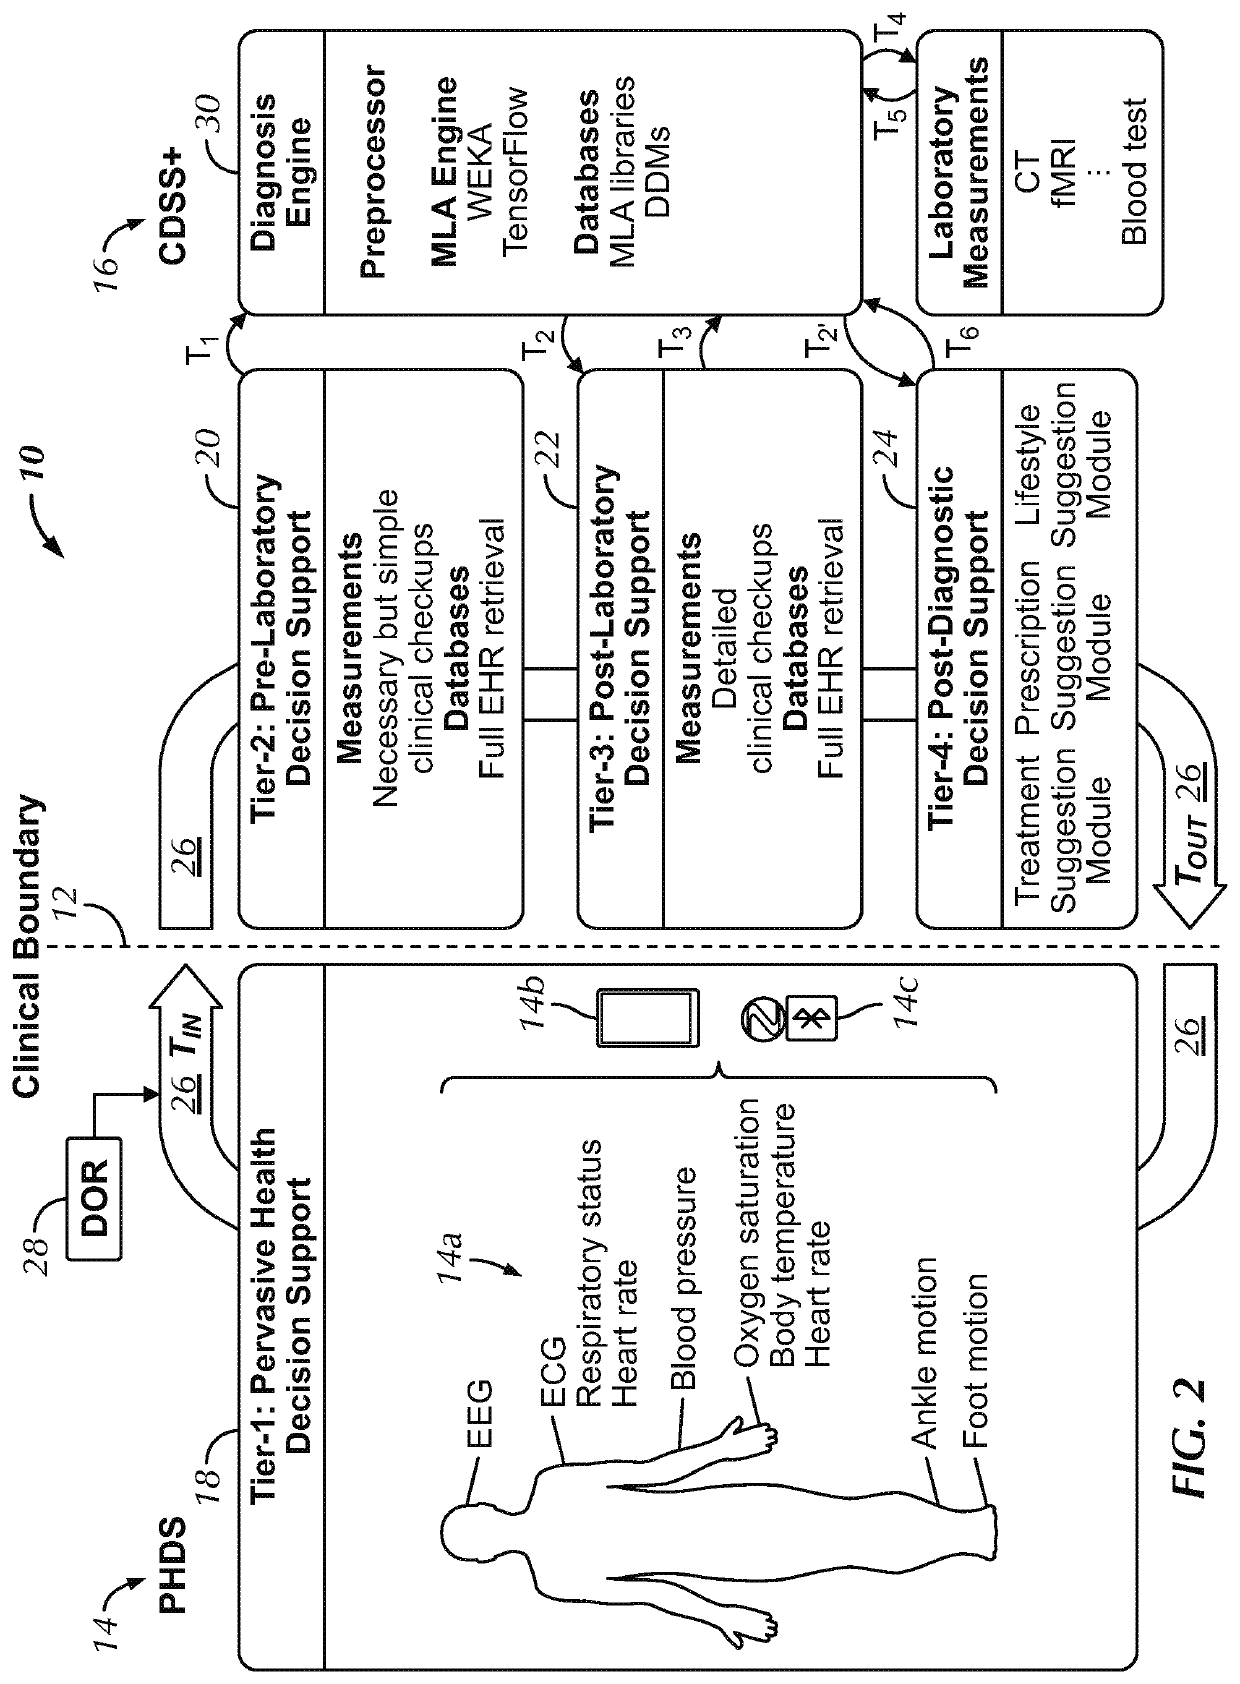 Hierarchical health decision support system and method